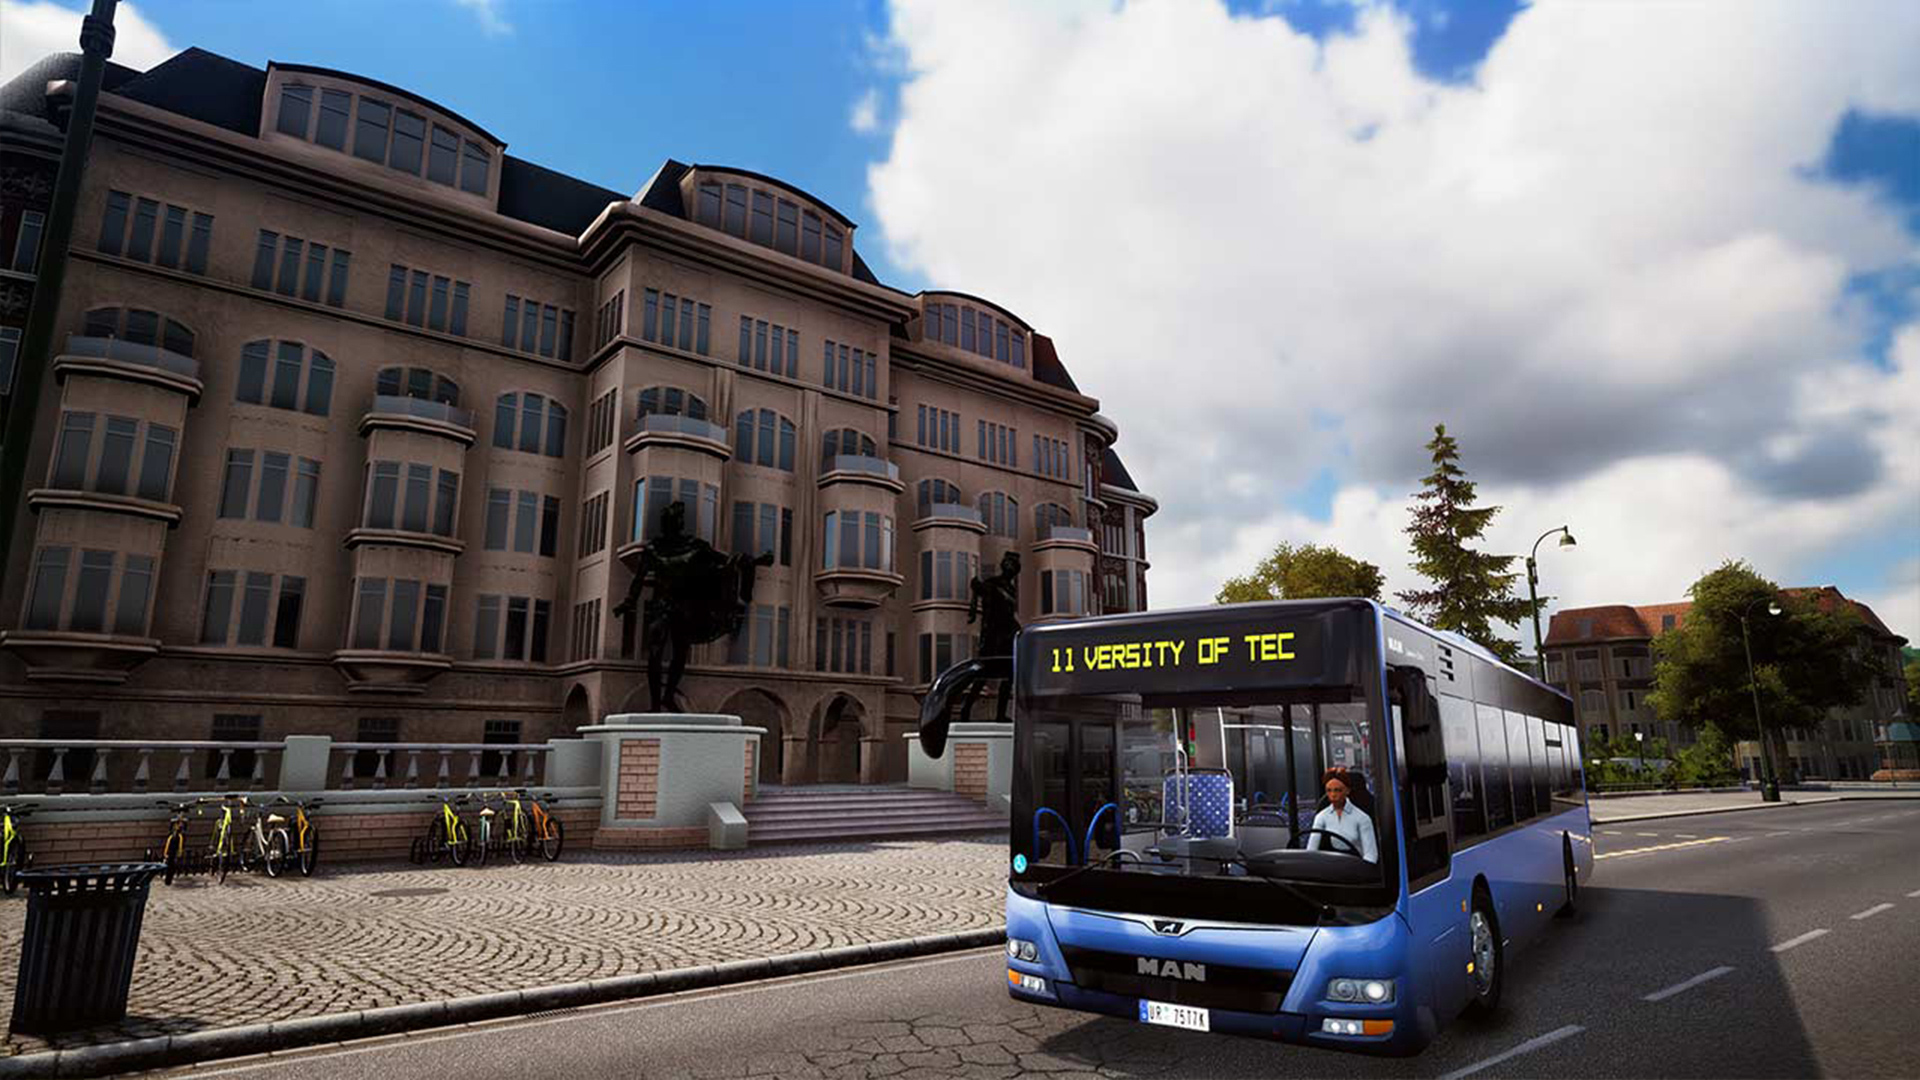 Heavy Bus Simulator - Check Out the Bus Simulator Game